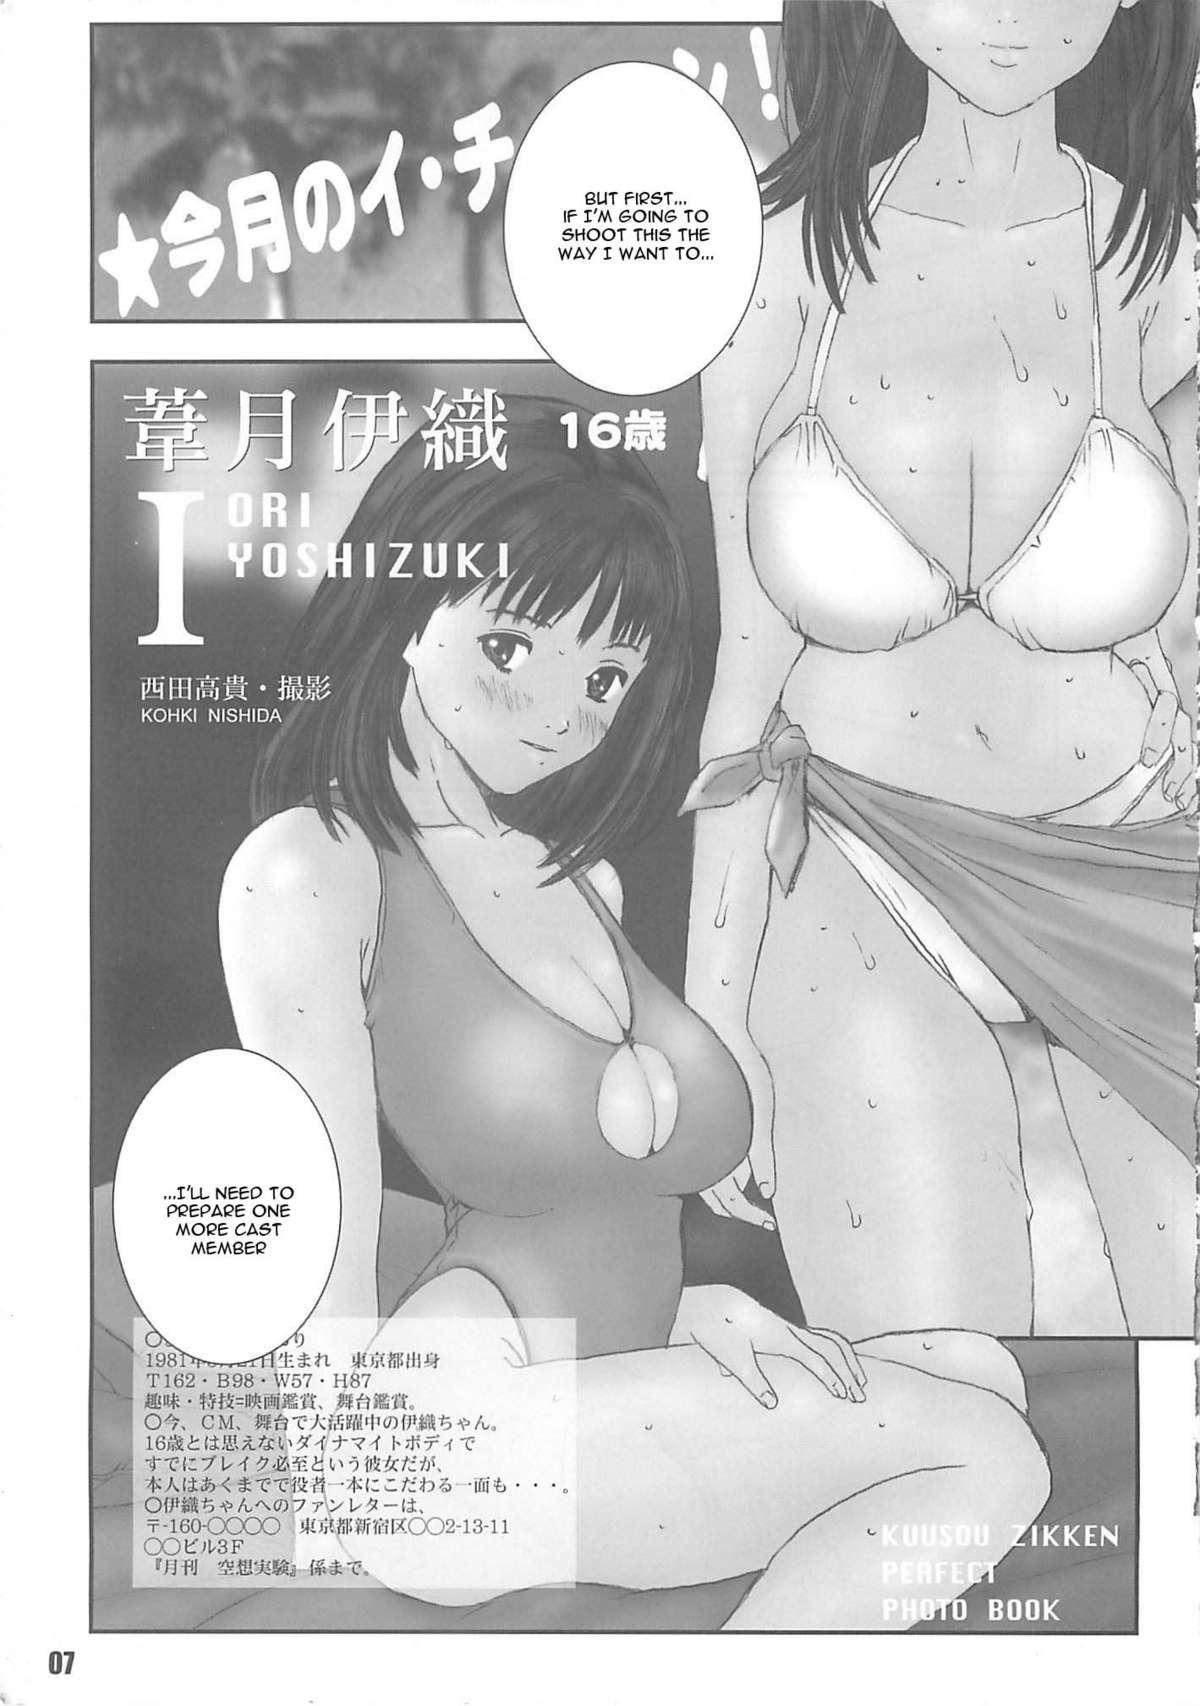 Best Blow Job Kuusou Zikken Vol. 4 - Is Pussy To Mouth - Page 7